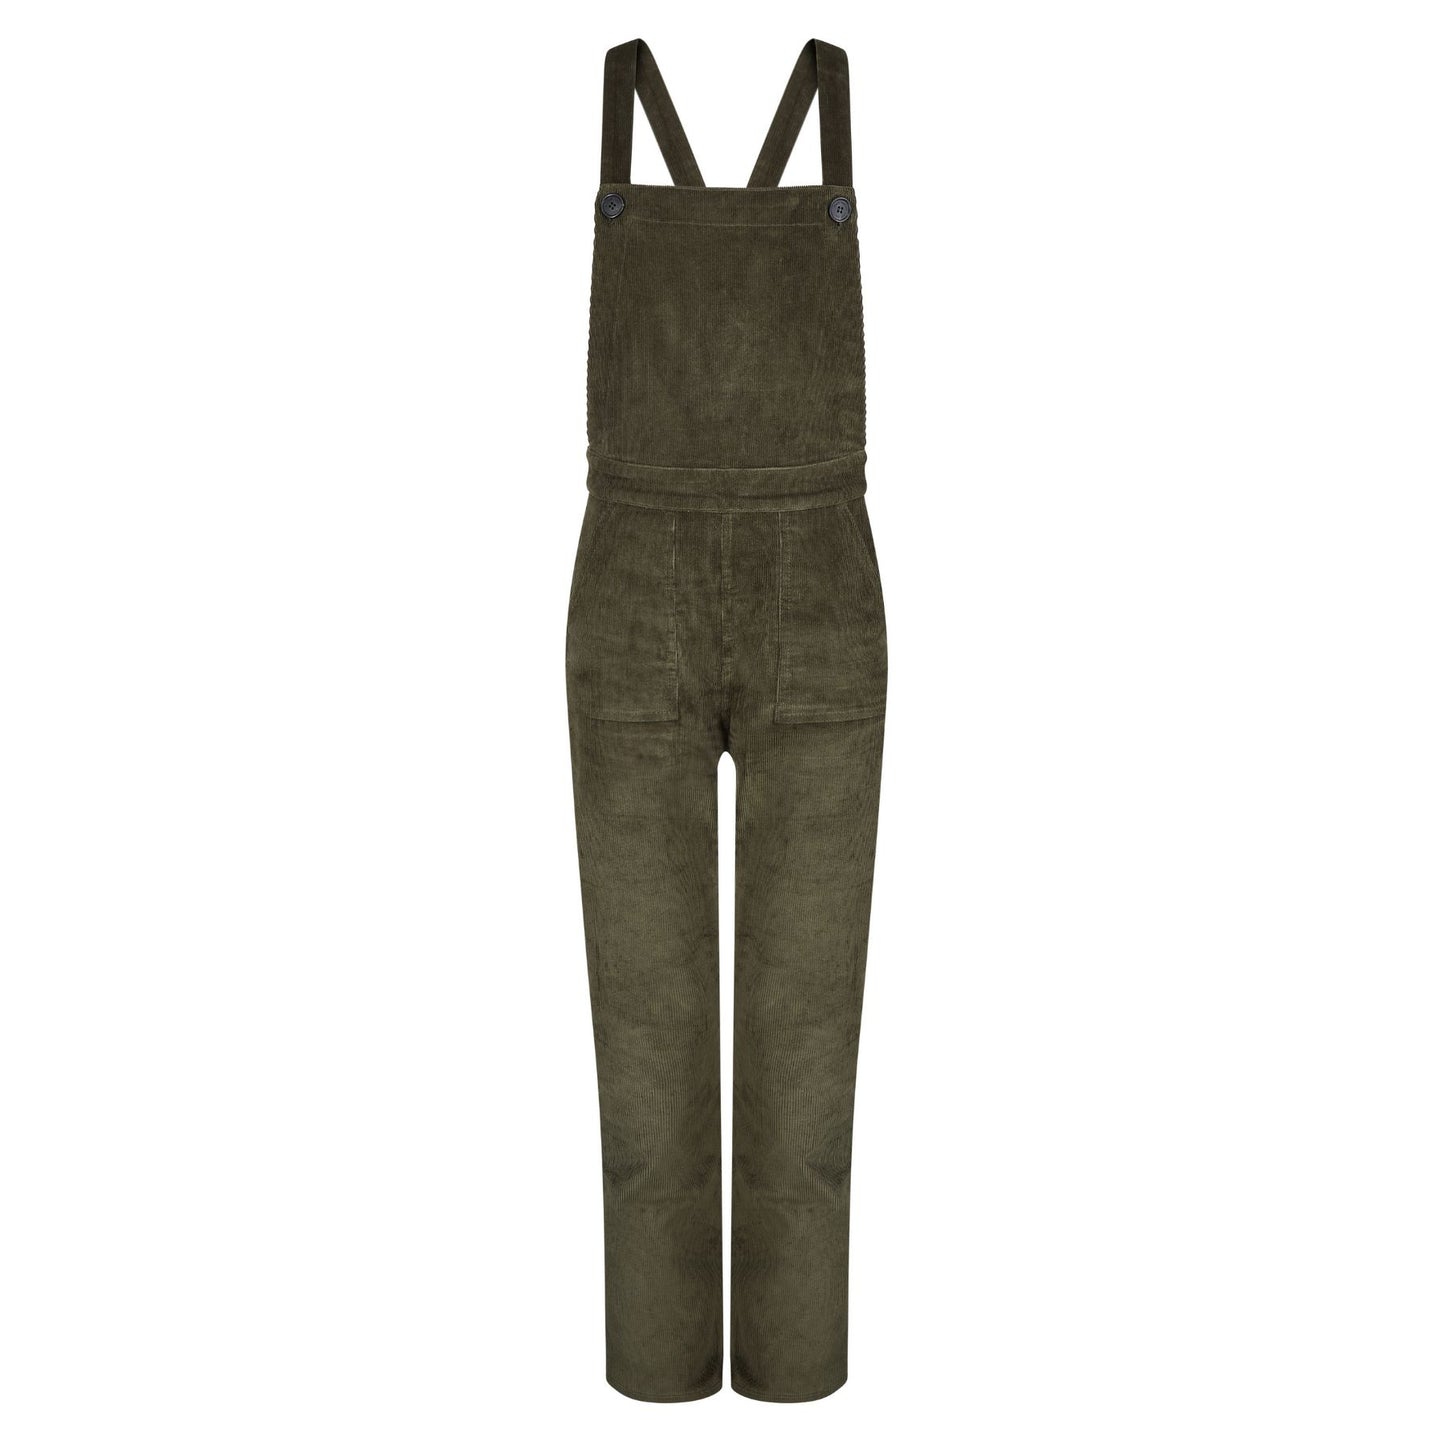 Stretch Corduroy Dungarees - Moss Green